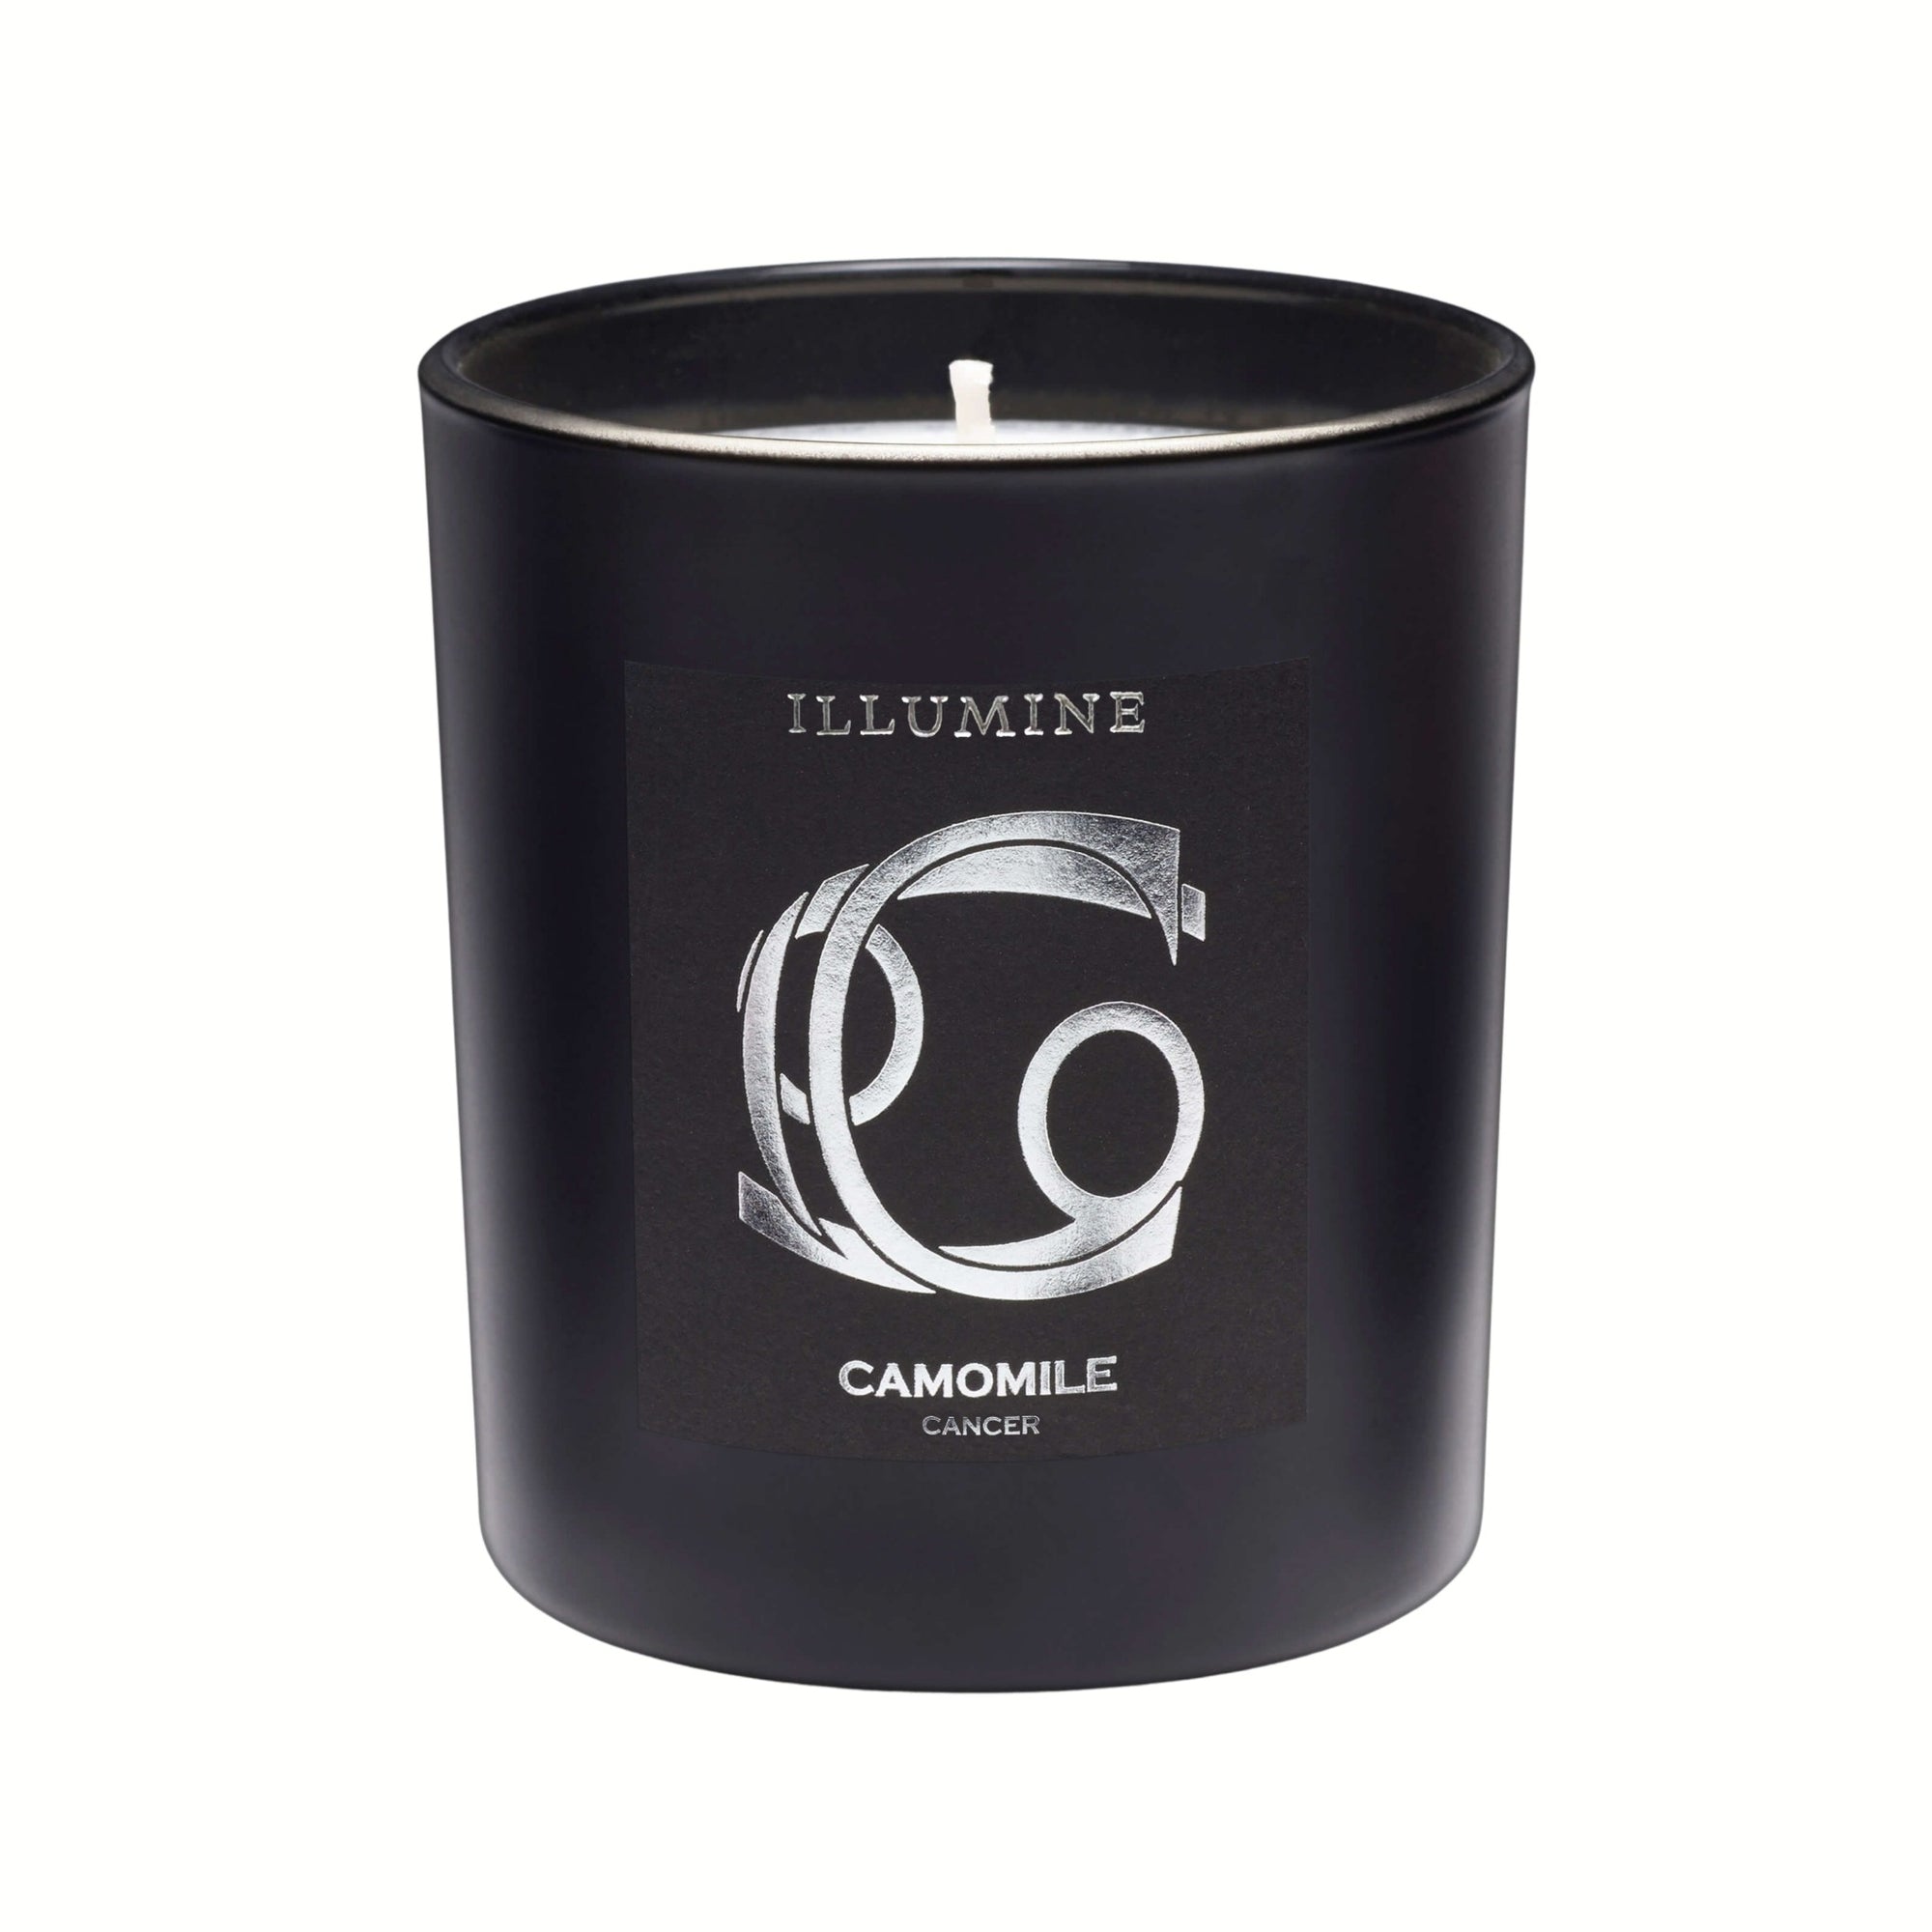 Illumine Cancer Candle on Silver for Emotional